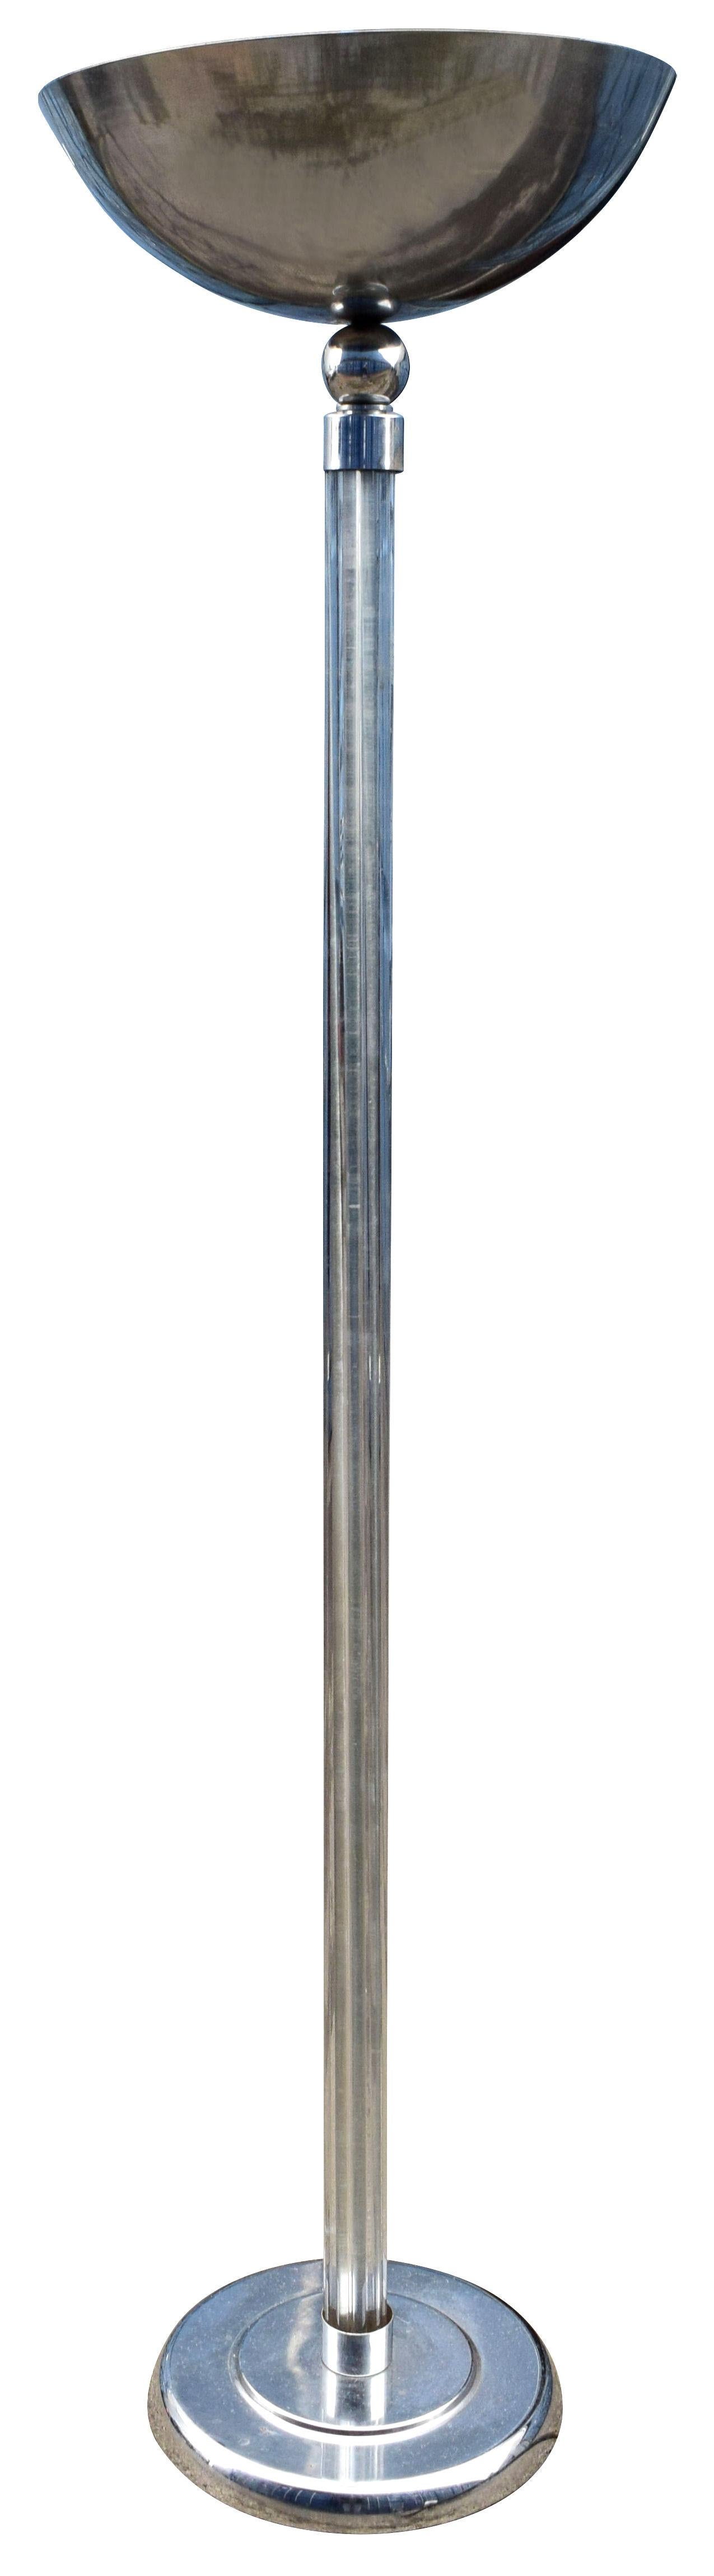 English Art Deco Chrome and Glass Uplighter Floor Lamp, 1930s  For Sale